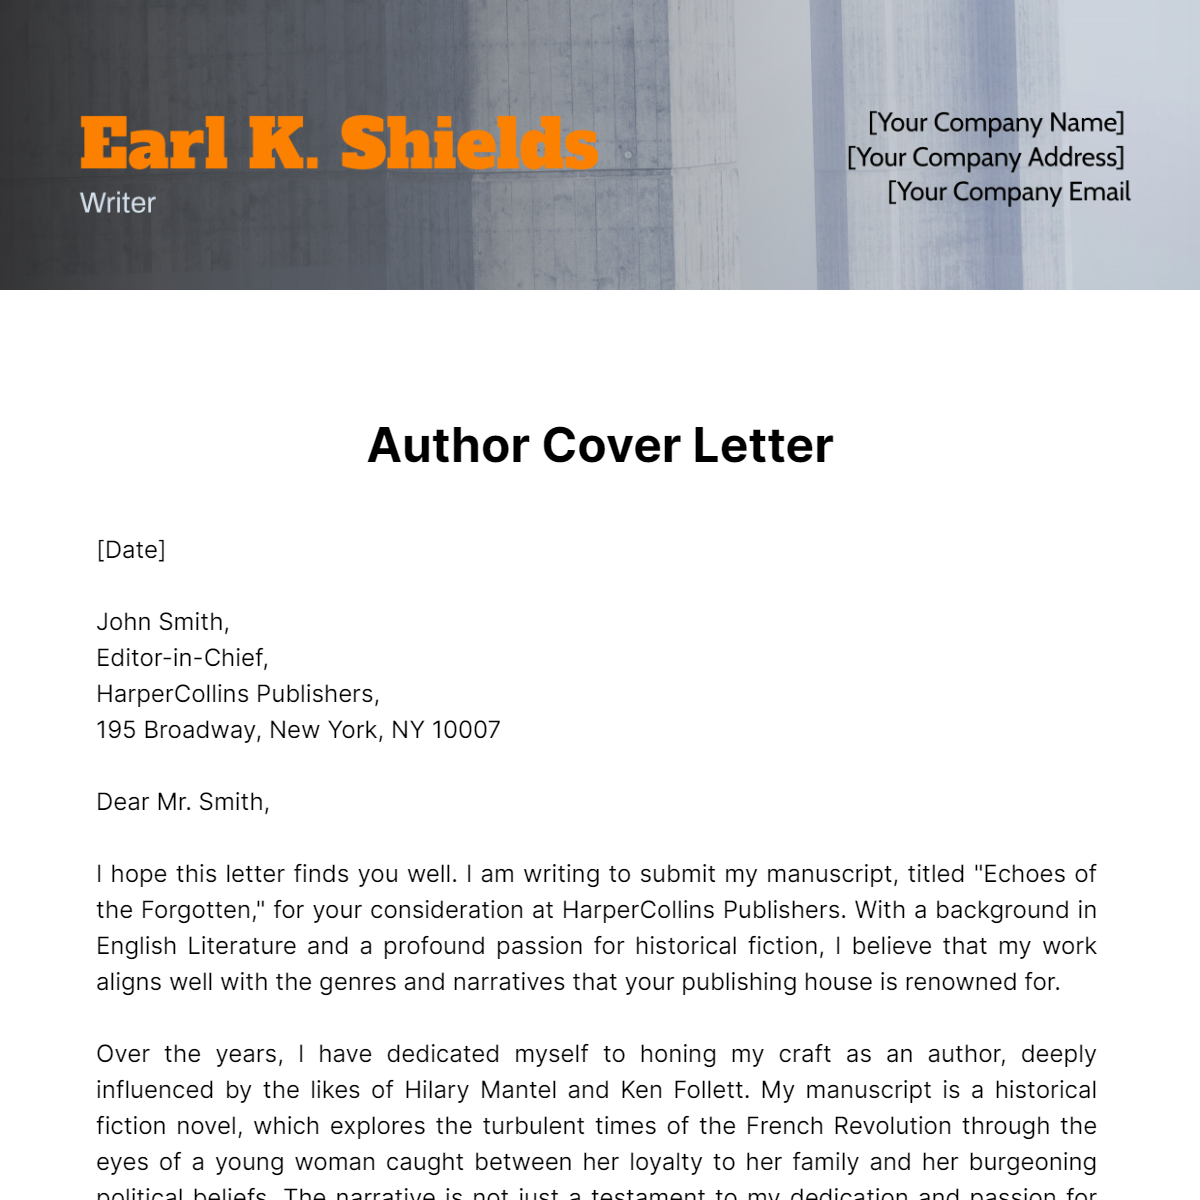 Author Cover Letter Template